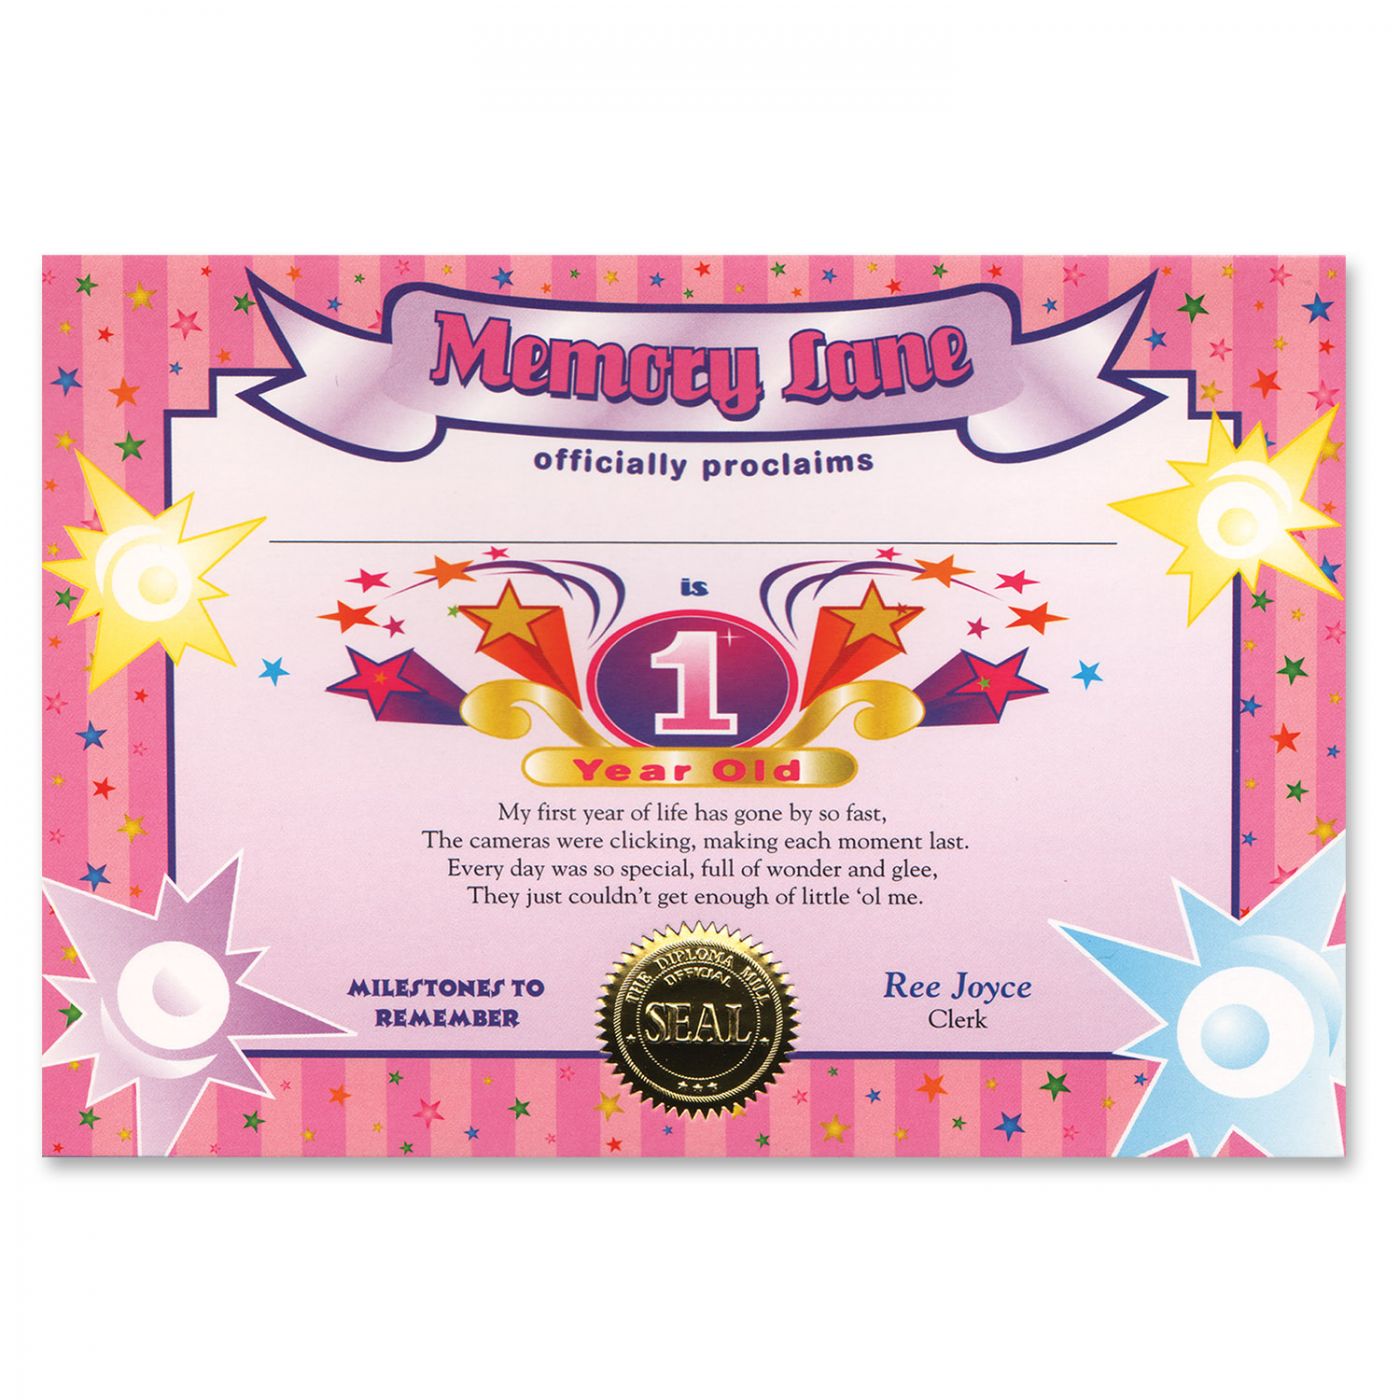 1 Year Old (Girl) Certificate (6) image